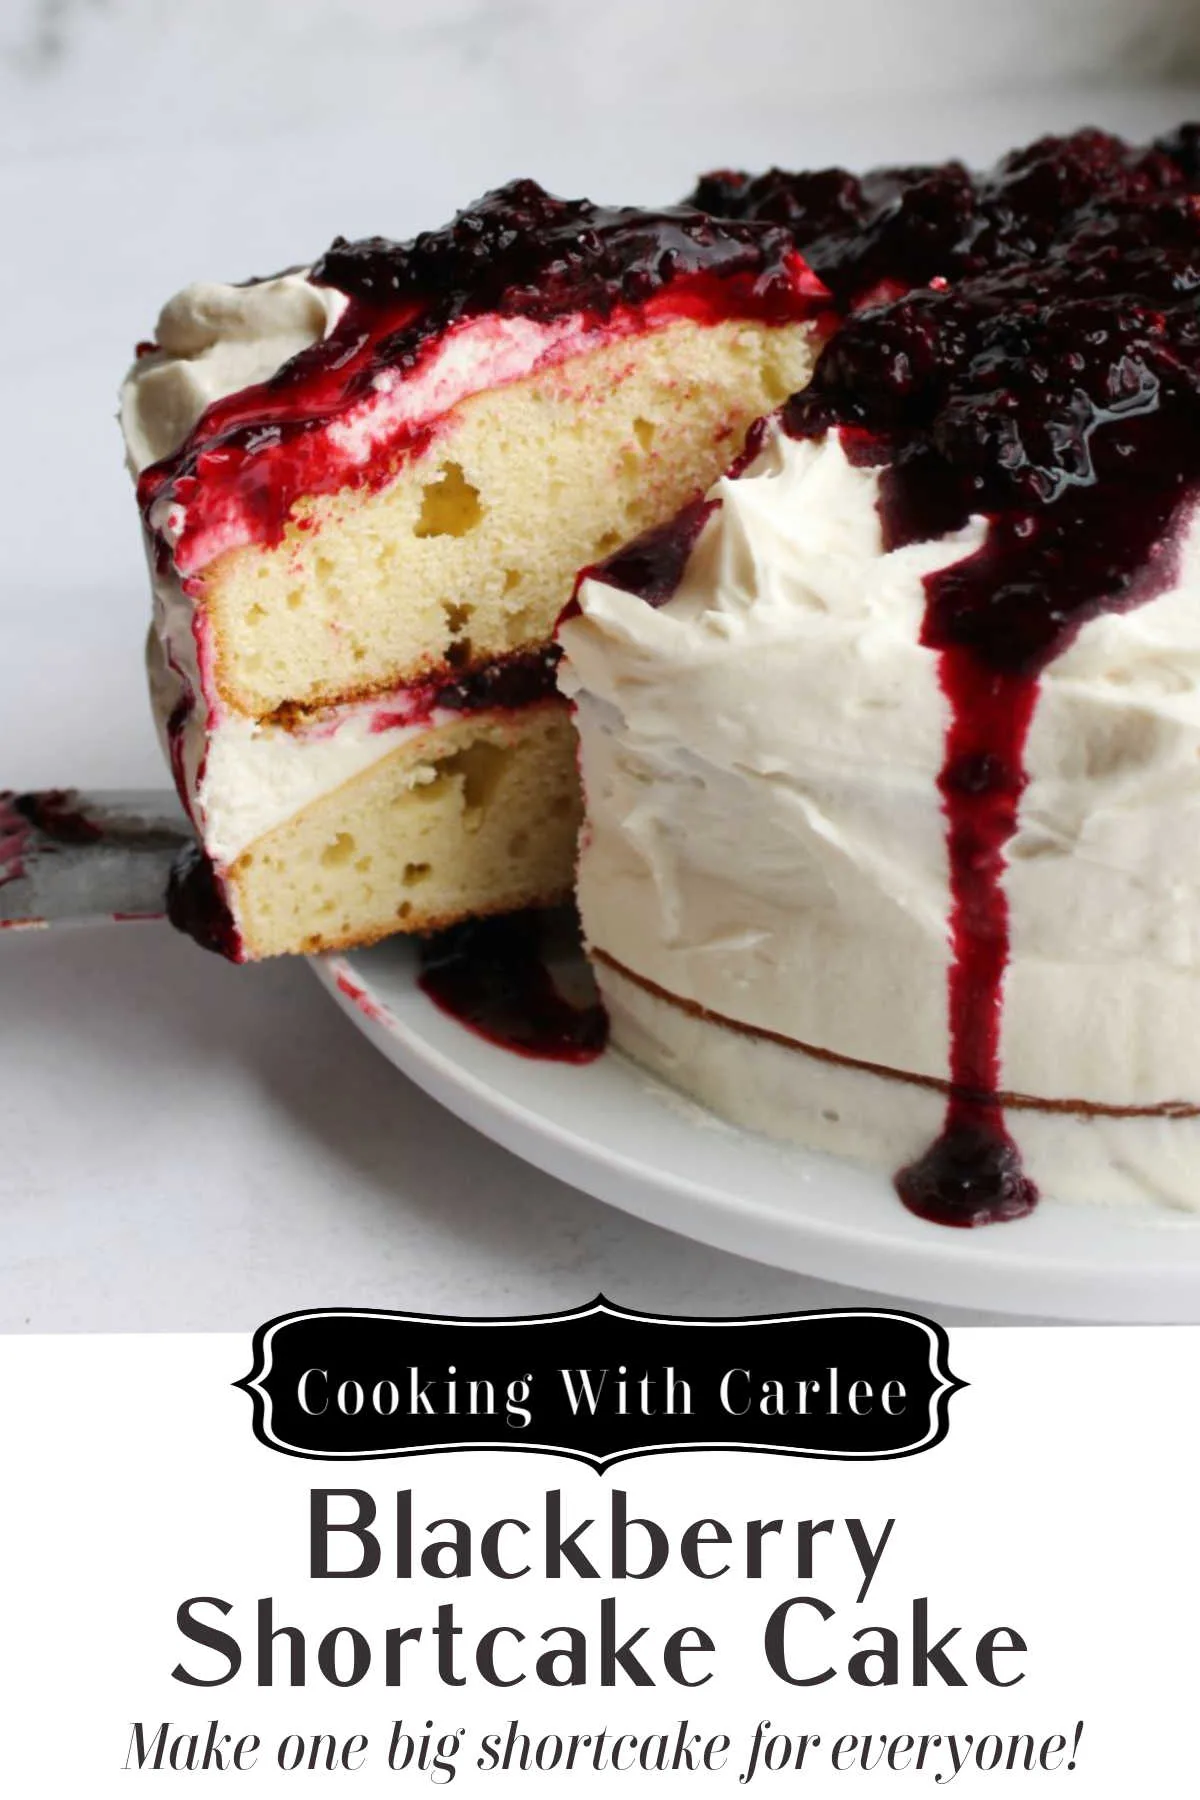 Instead of making individual shortcakes for everyone, make one big blackberry shortcake cake. It is a beauty to make and serve and it tastes delicious too. With layers of slightly sweet biscuity cake, fluffy vanilla frosting and plenty of blackberries to go around, it is a sure winner.